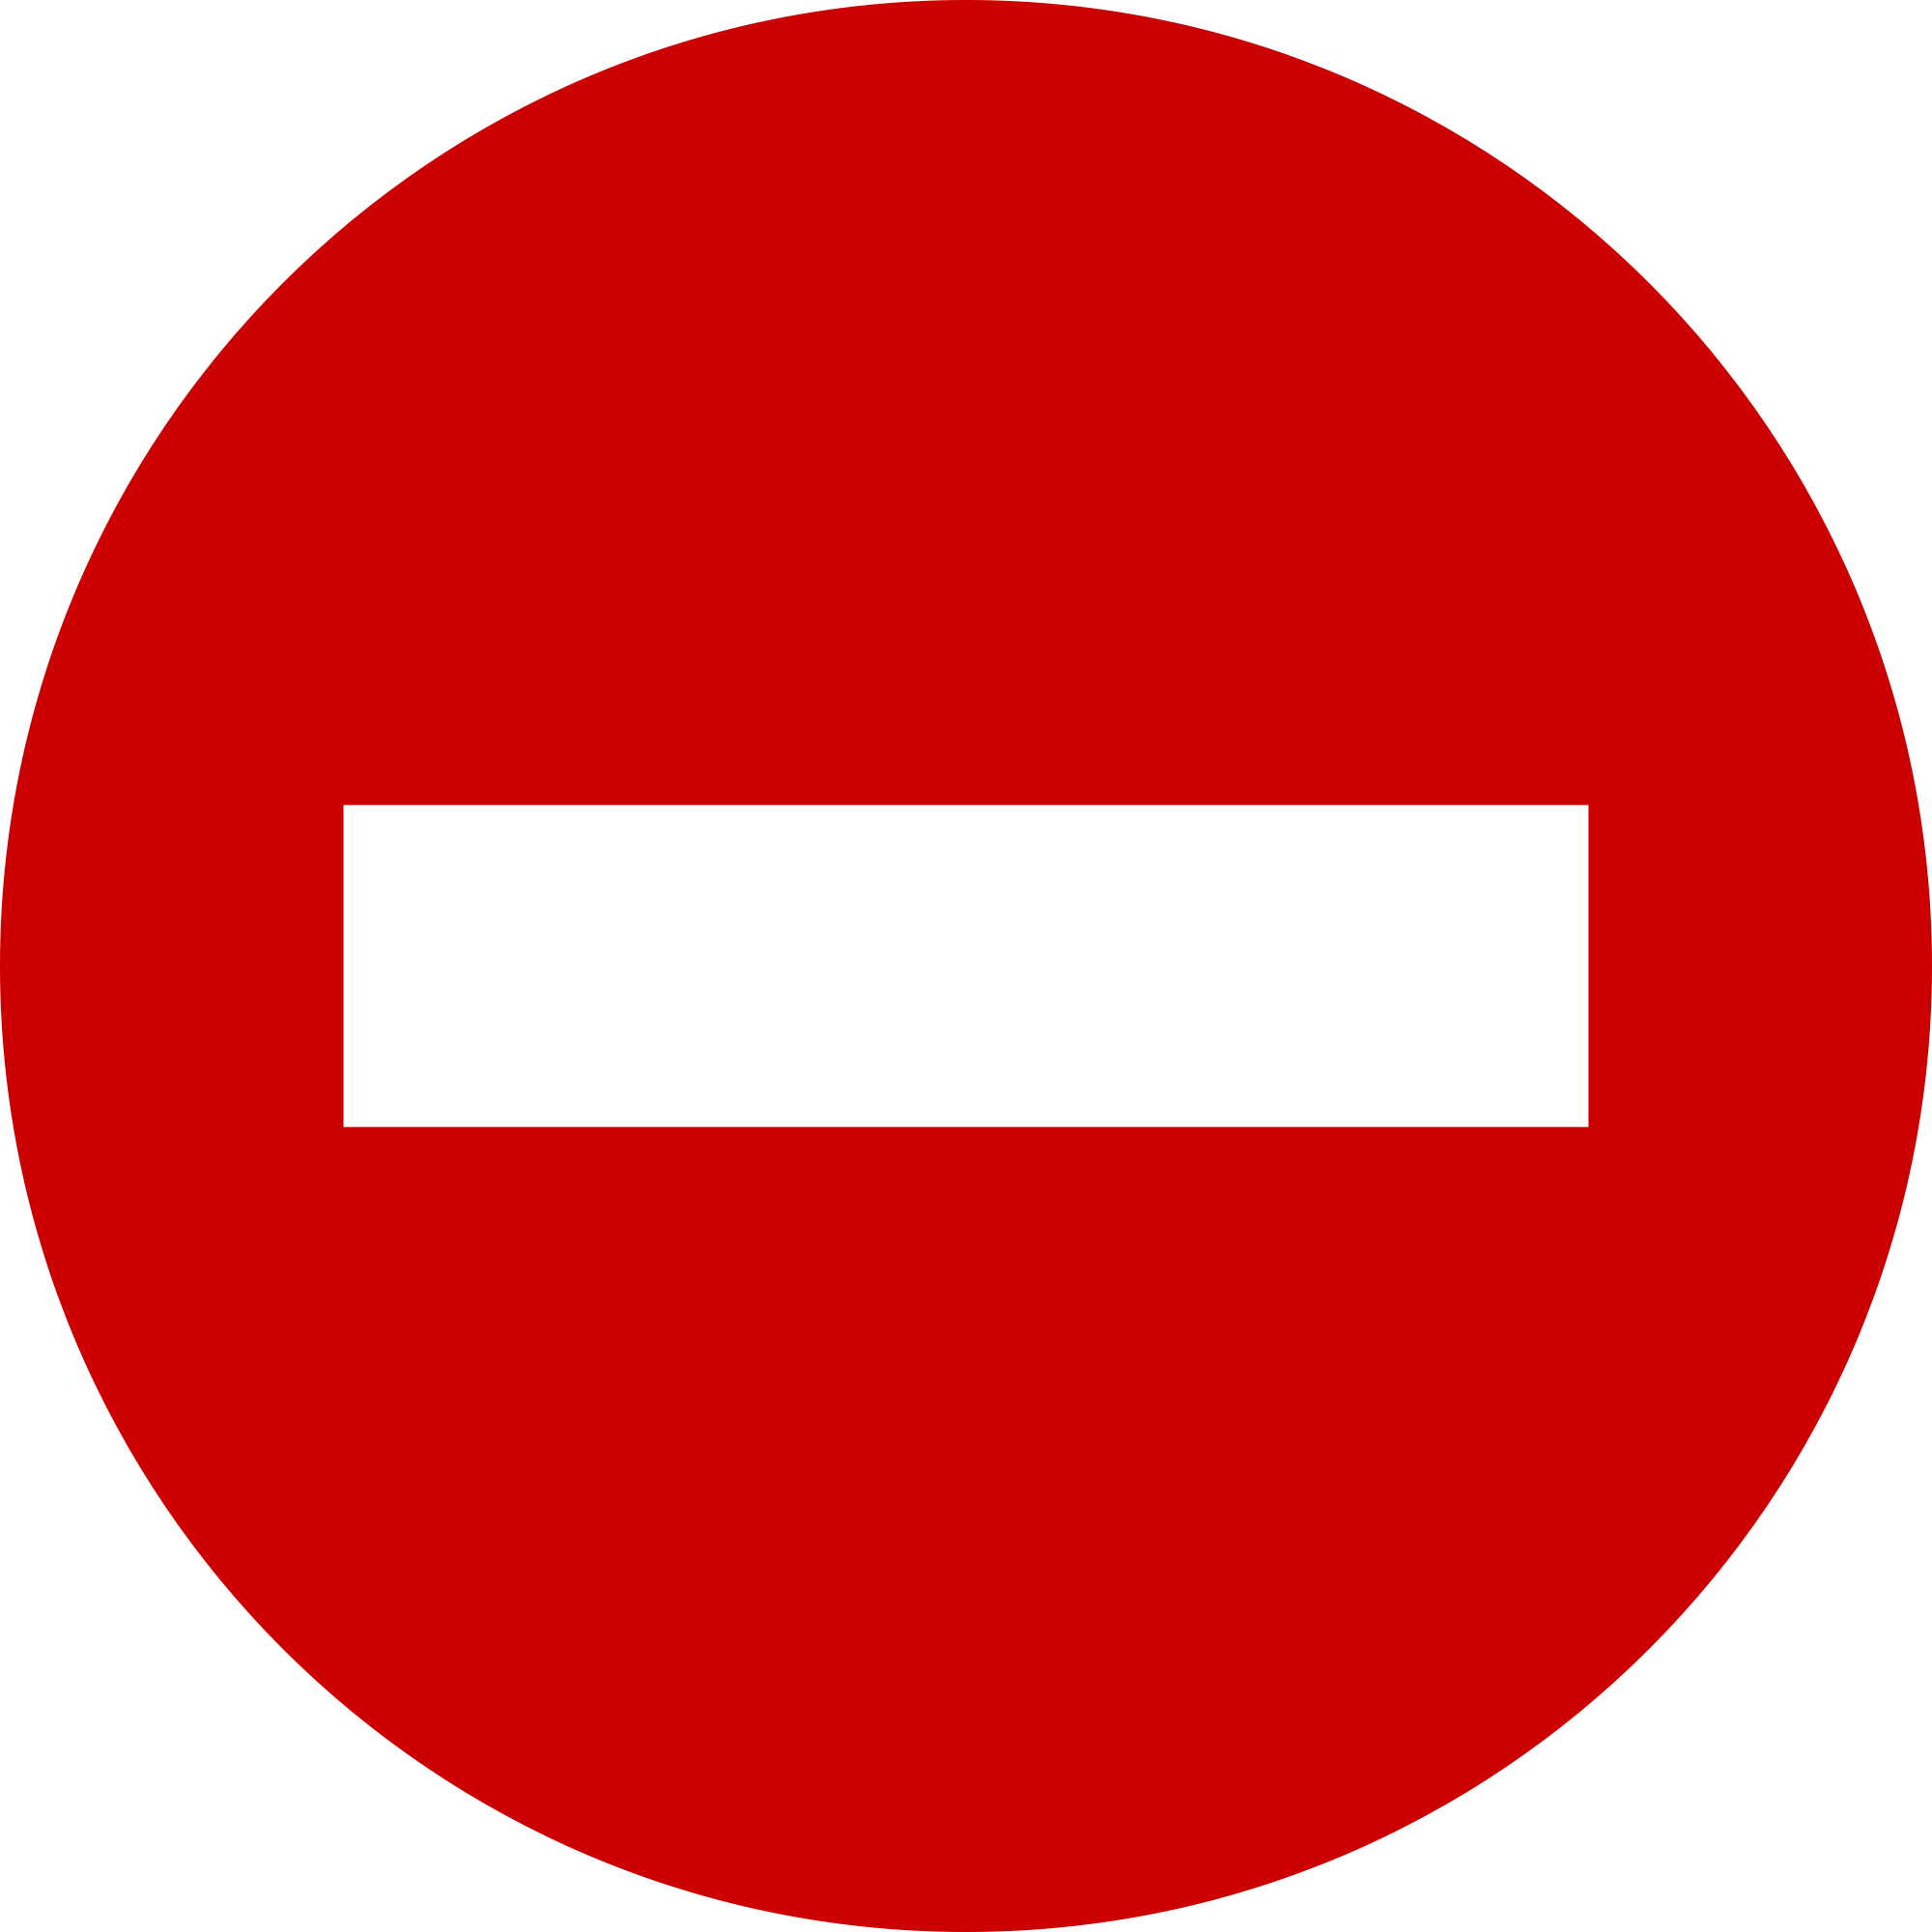 File:Road-sign-no-entry.svg - Wikimedia Commons